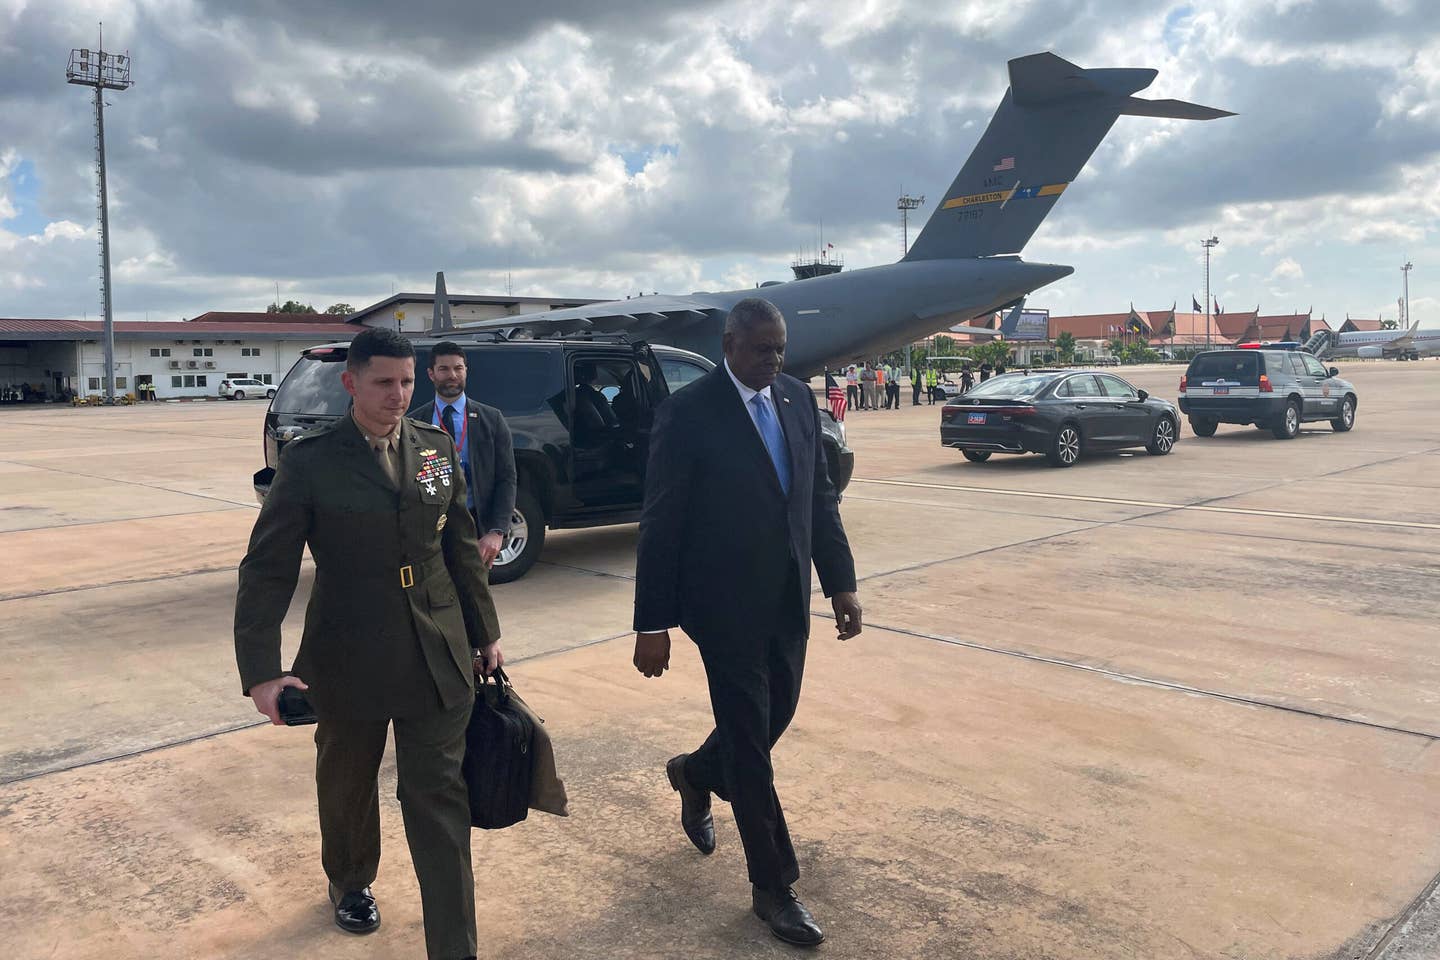 U.S. Secretary of Defense Lloyd Austin leaves Siem Reap International Airport in Cambodia on November 23, 2022, after having met his Chinese counterpart Wei Fenghe. <em>Photo by W.G. DUNLOP/AFP via Getty Images</em>